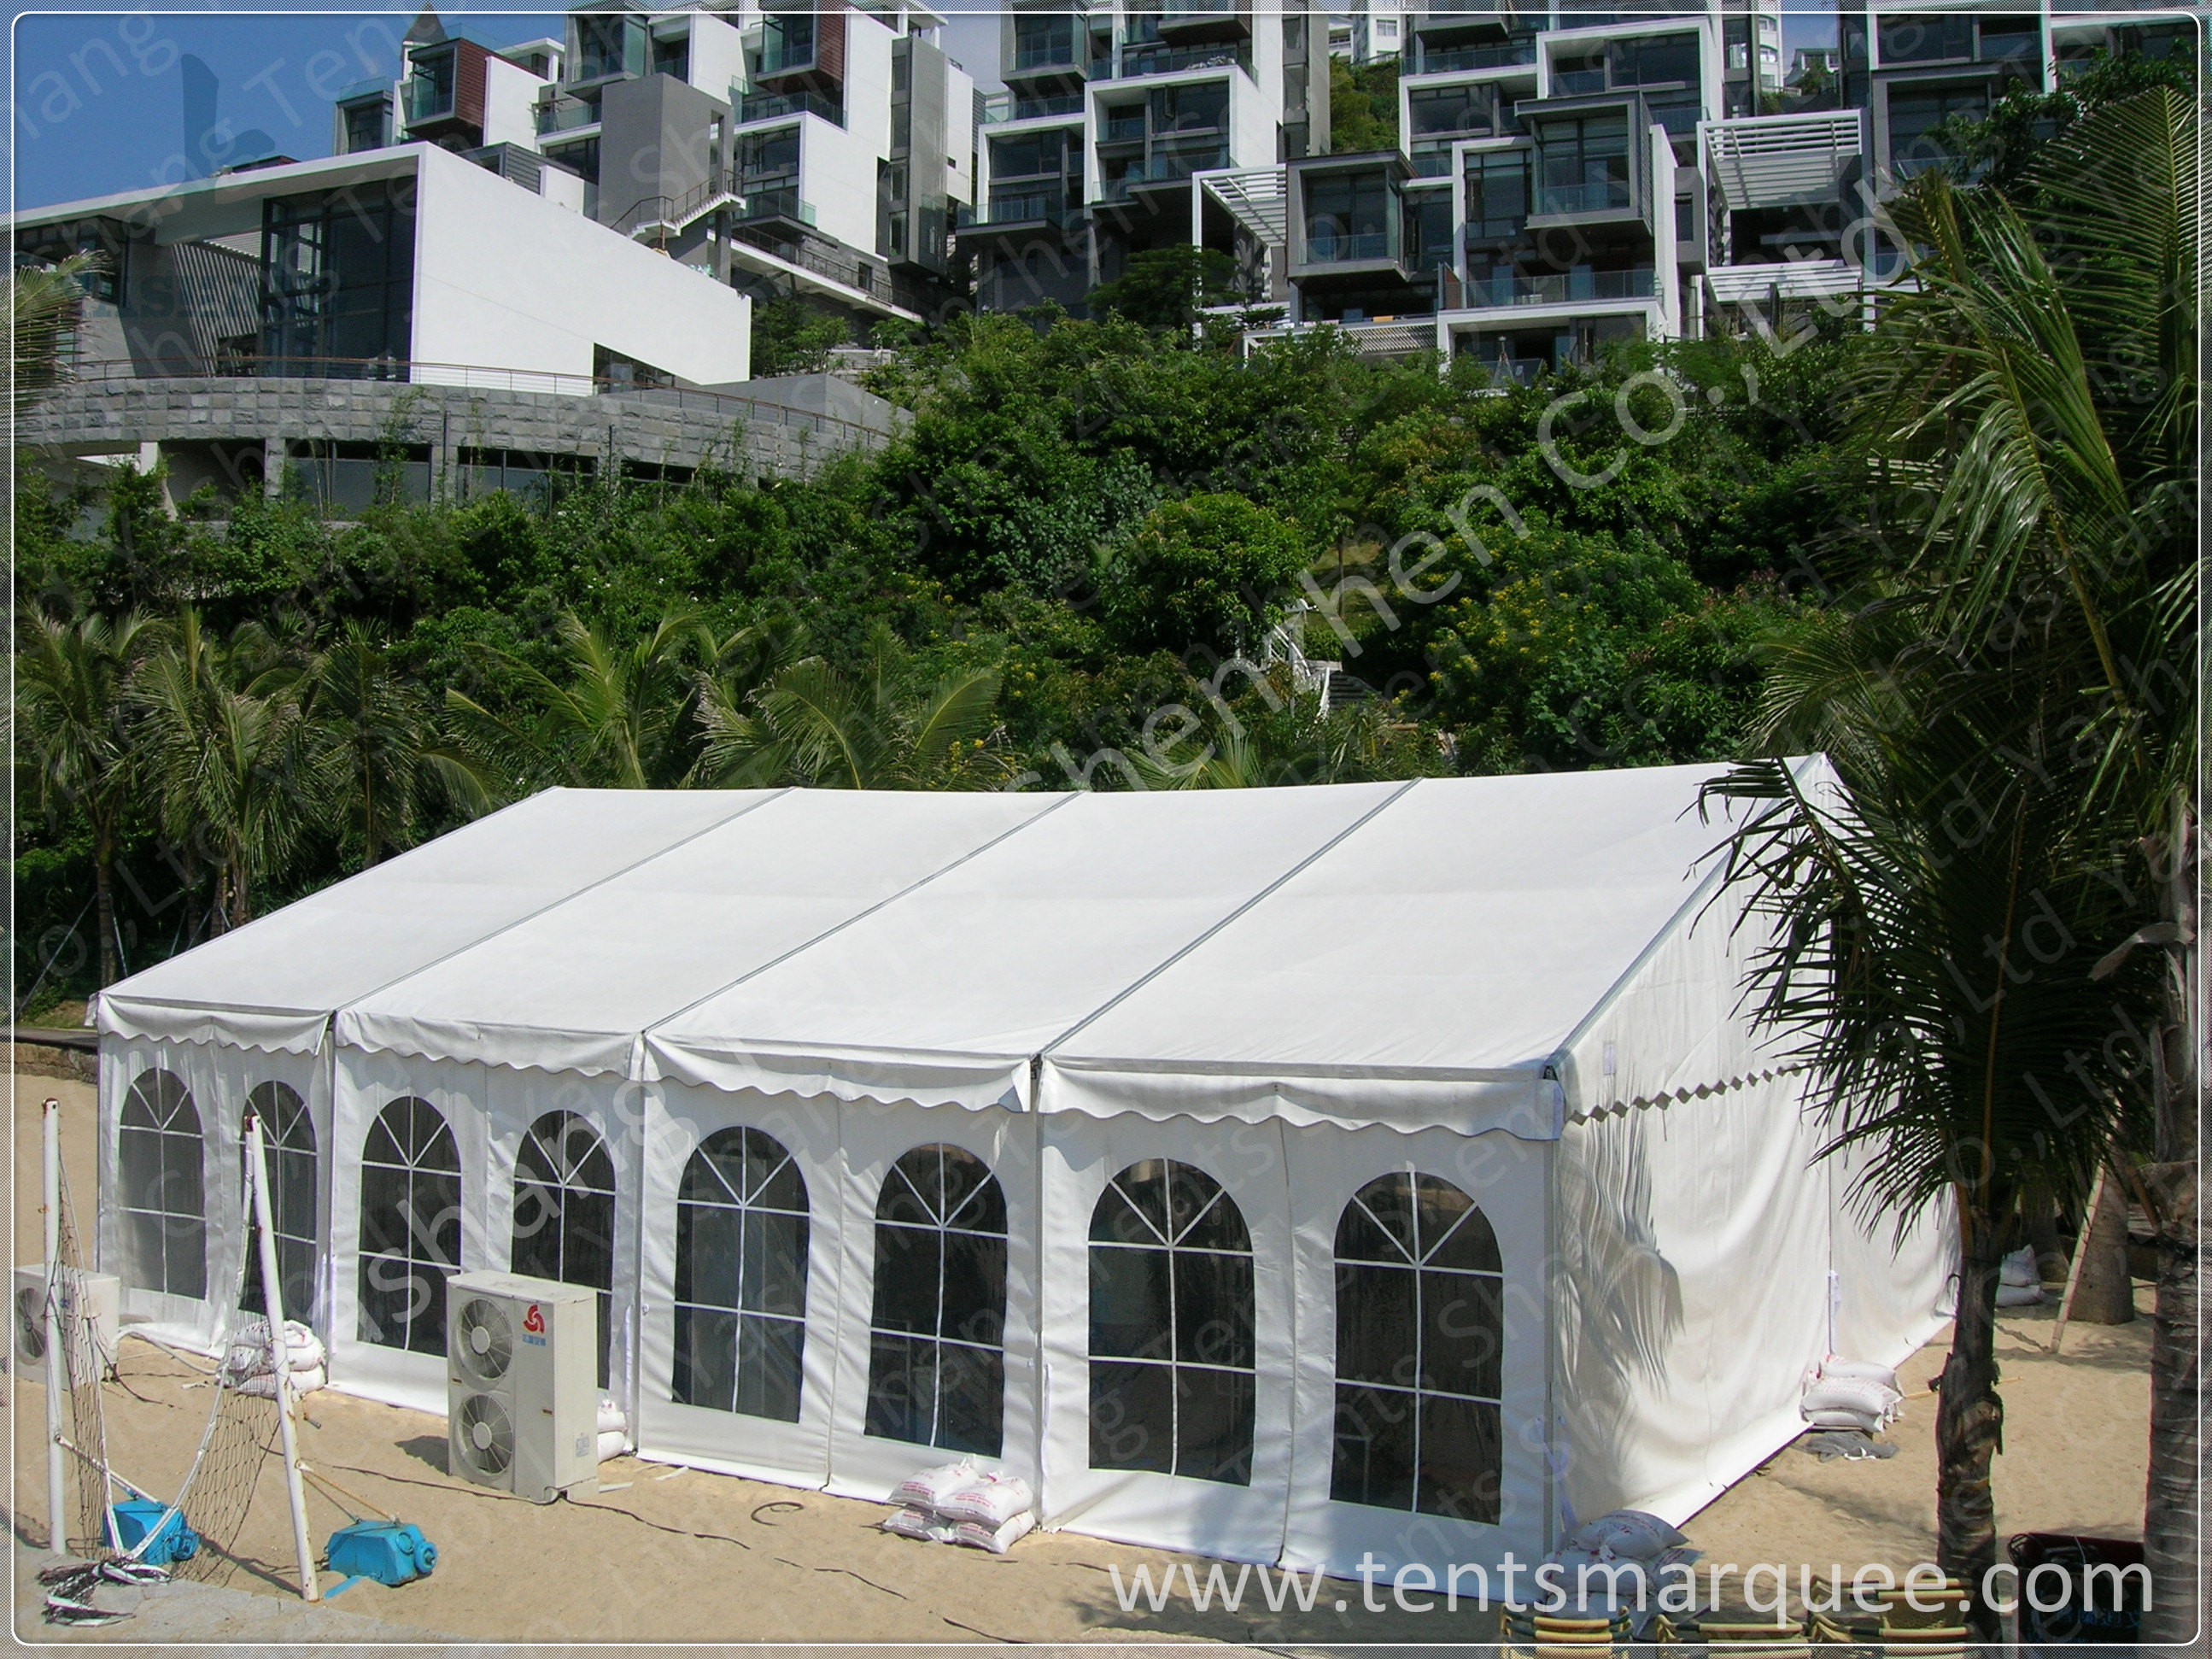 Activities Held in the White Fabric Roof Event Tent Preventing from Strong Sun